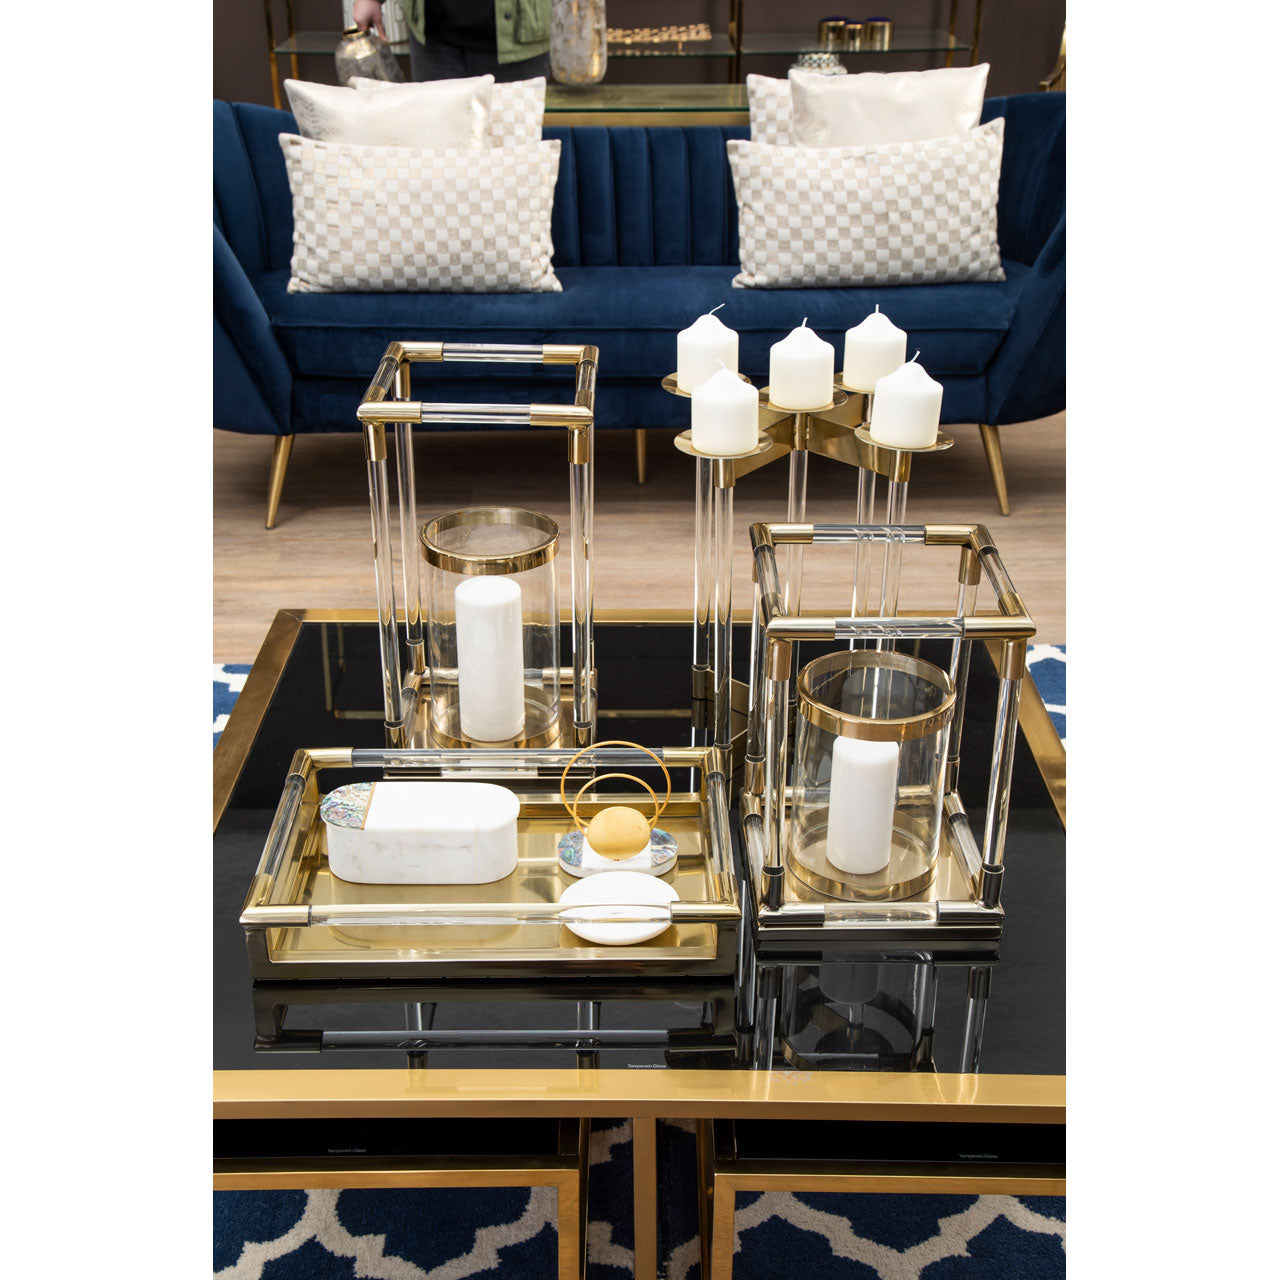  Premier-Olivia's Luxe Collection - Libby Candle Holder Candelabra-Gold 853 